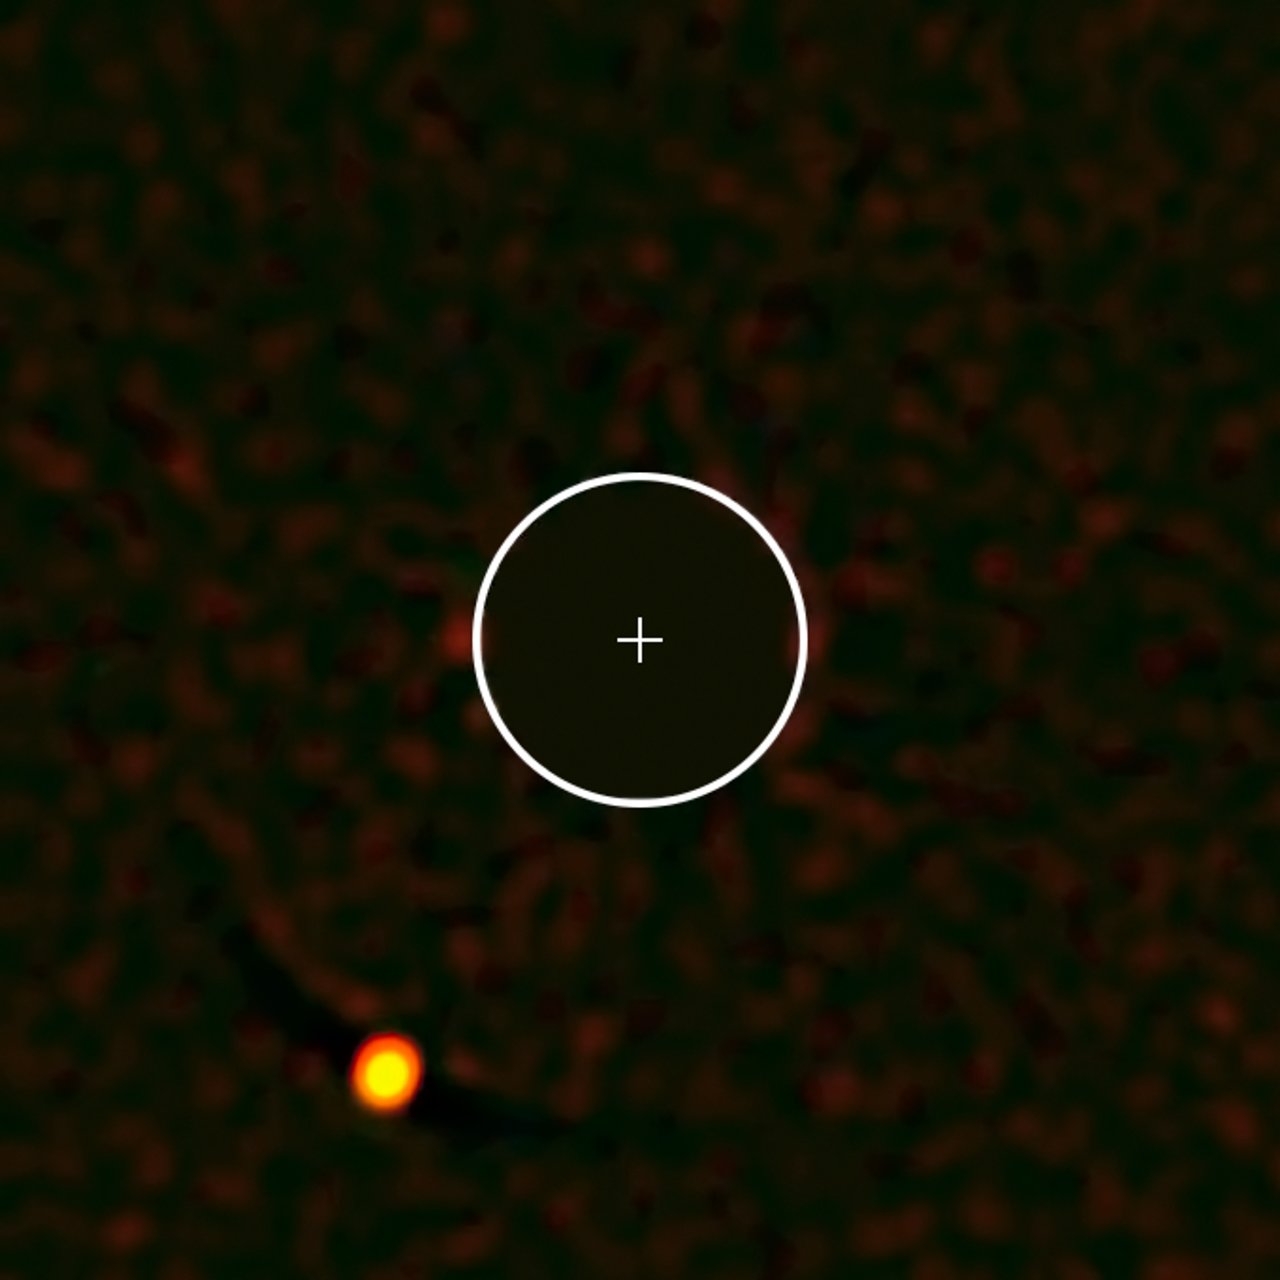 The exoplanet HIP 65426b — the first to be seen by the SPHERE instrument on ESO’s Very Large Telescope. The image of the parent star has been removed from the image for clarity, and its position marked with a cross; the circle indicates the orbit of Neptune around the Sun on the same scale. The planet is clearly visible at the lower-left in this remarkable image.